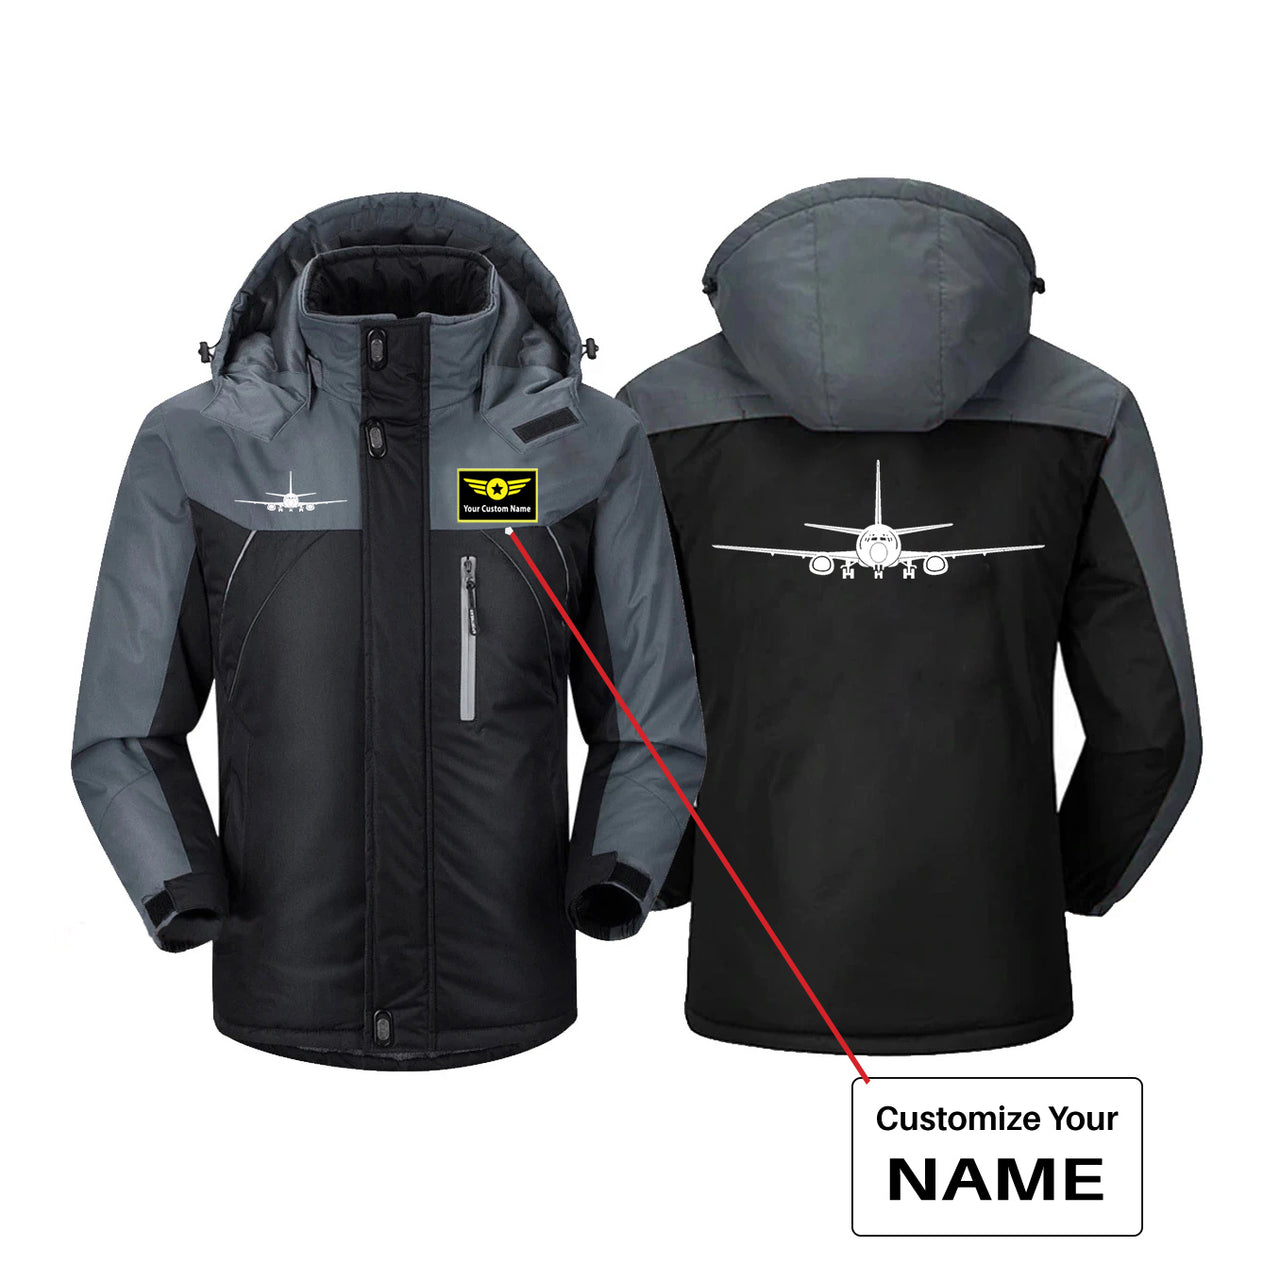 Boeing 737 Silhouette Designed Thick Winter Jackets